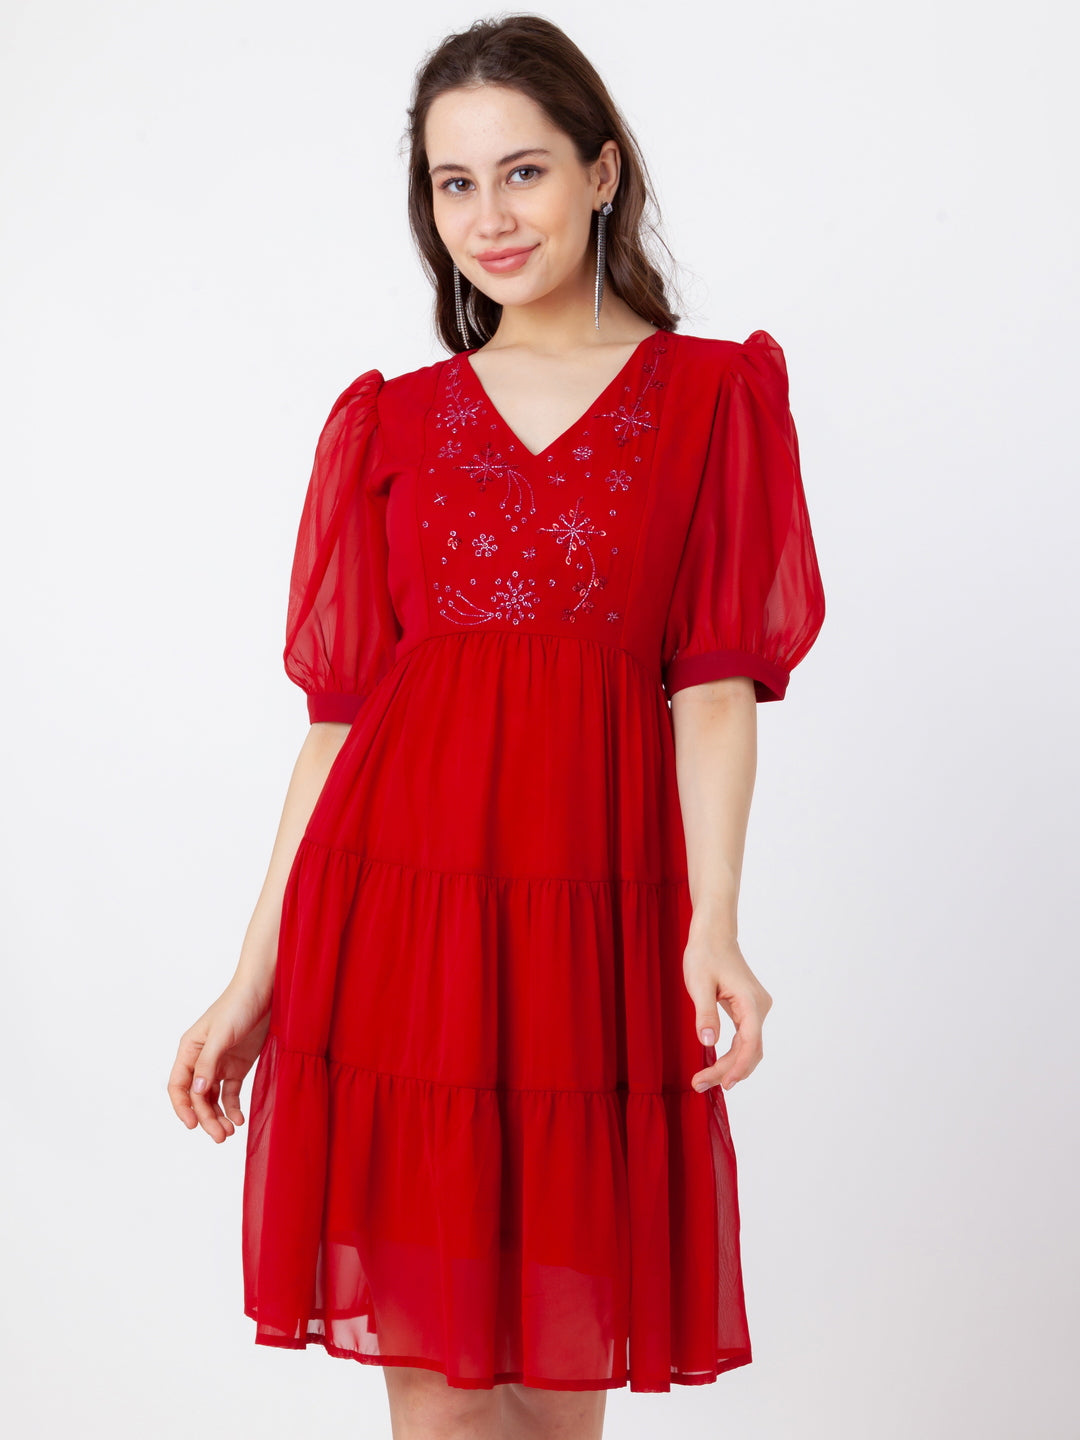 Red_Embroidered_Tiered_Short_Dress_2